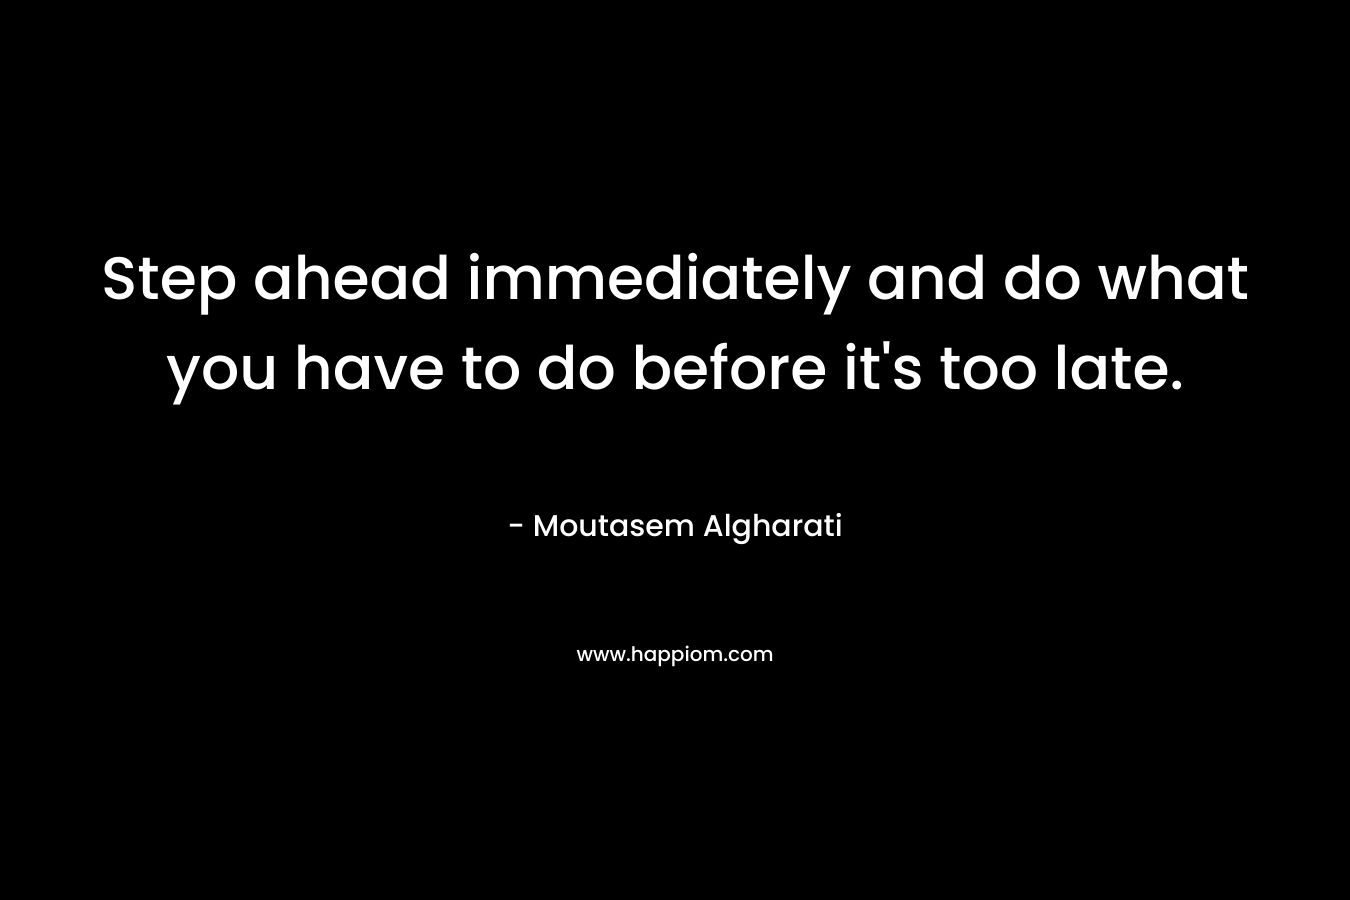 Step ahead immediately and do what you have to do before it’s too late. – Moutasem Algharati